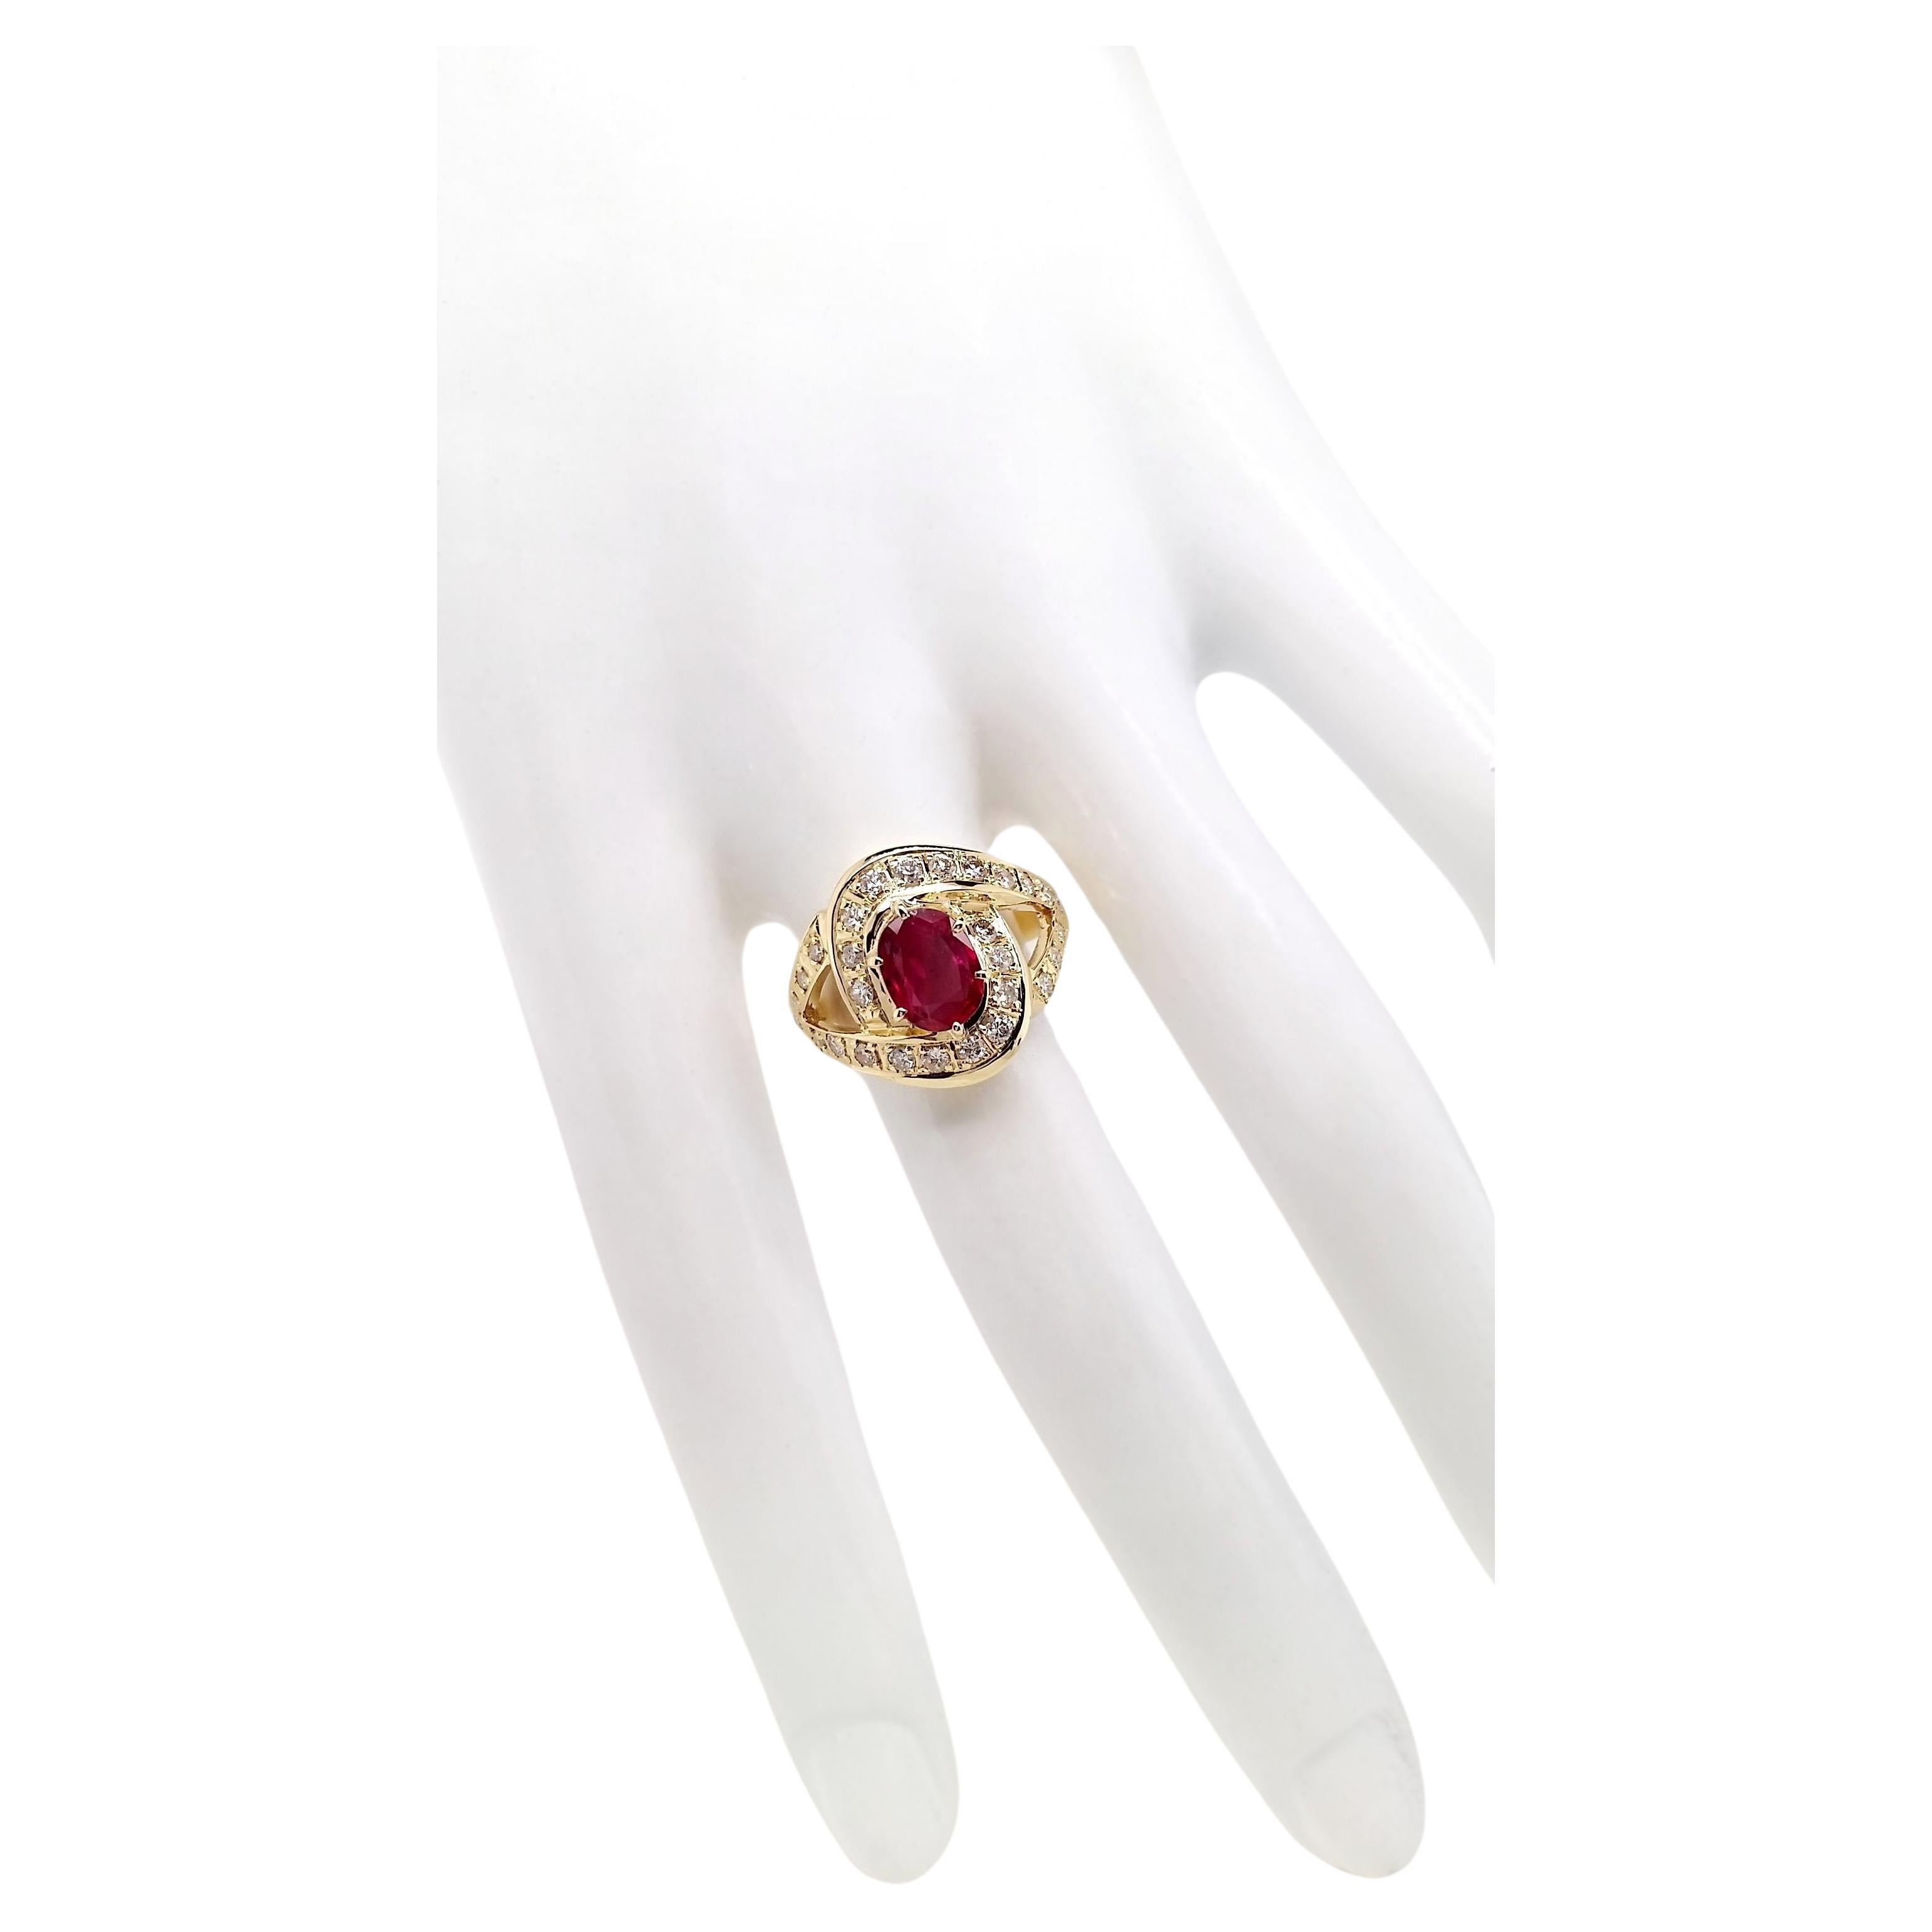 IGI Certified 1.10ct Natural Ruby and 0.60ct Diamonds 18k Yellow Gold Ring